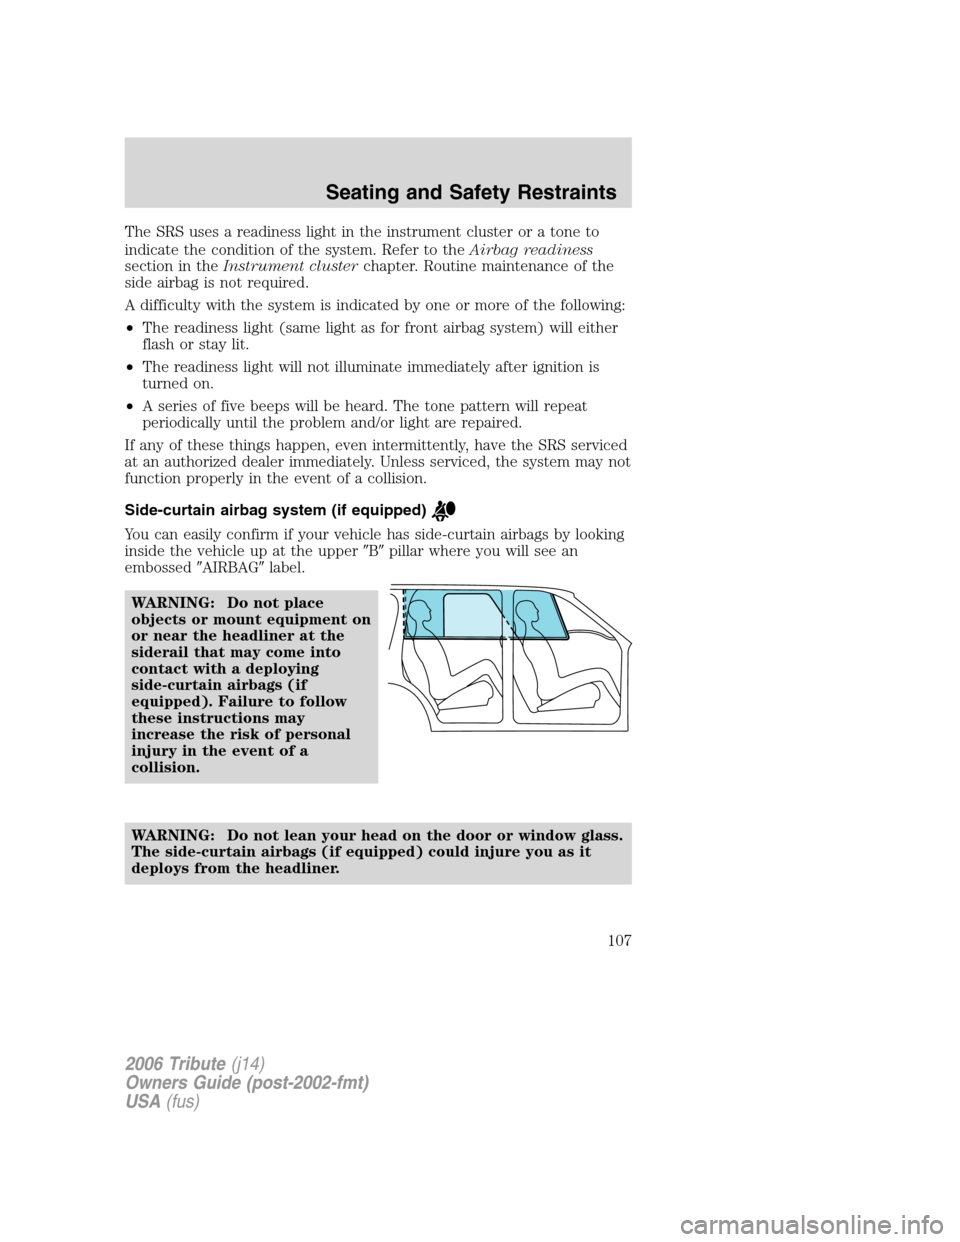 MAZDA MODEL TRIBUTE 2006   (in English) Owners Manual The SRS uses a readiness light in the instrument cluster or a tone to
indicate the condition of the system. Refer to theAirbag readiness
section in theInstrument clusterchapter. Routine maintenance of